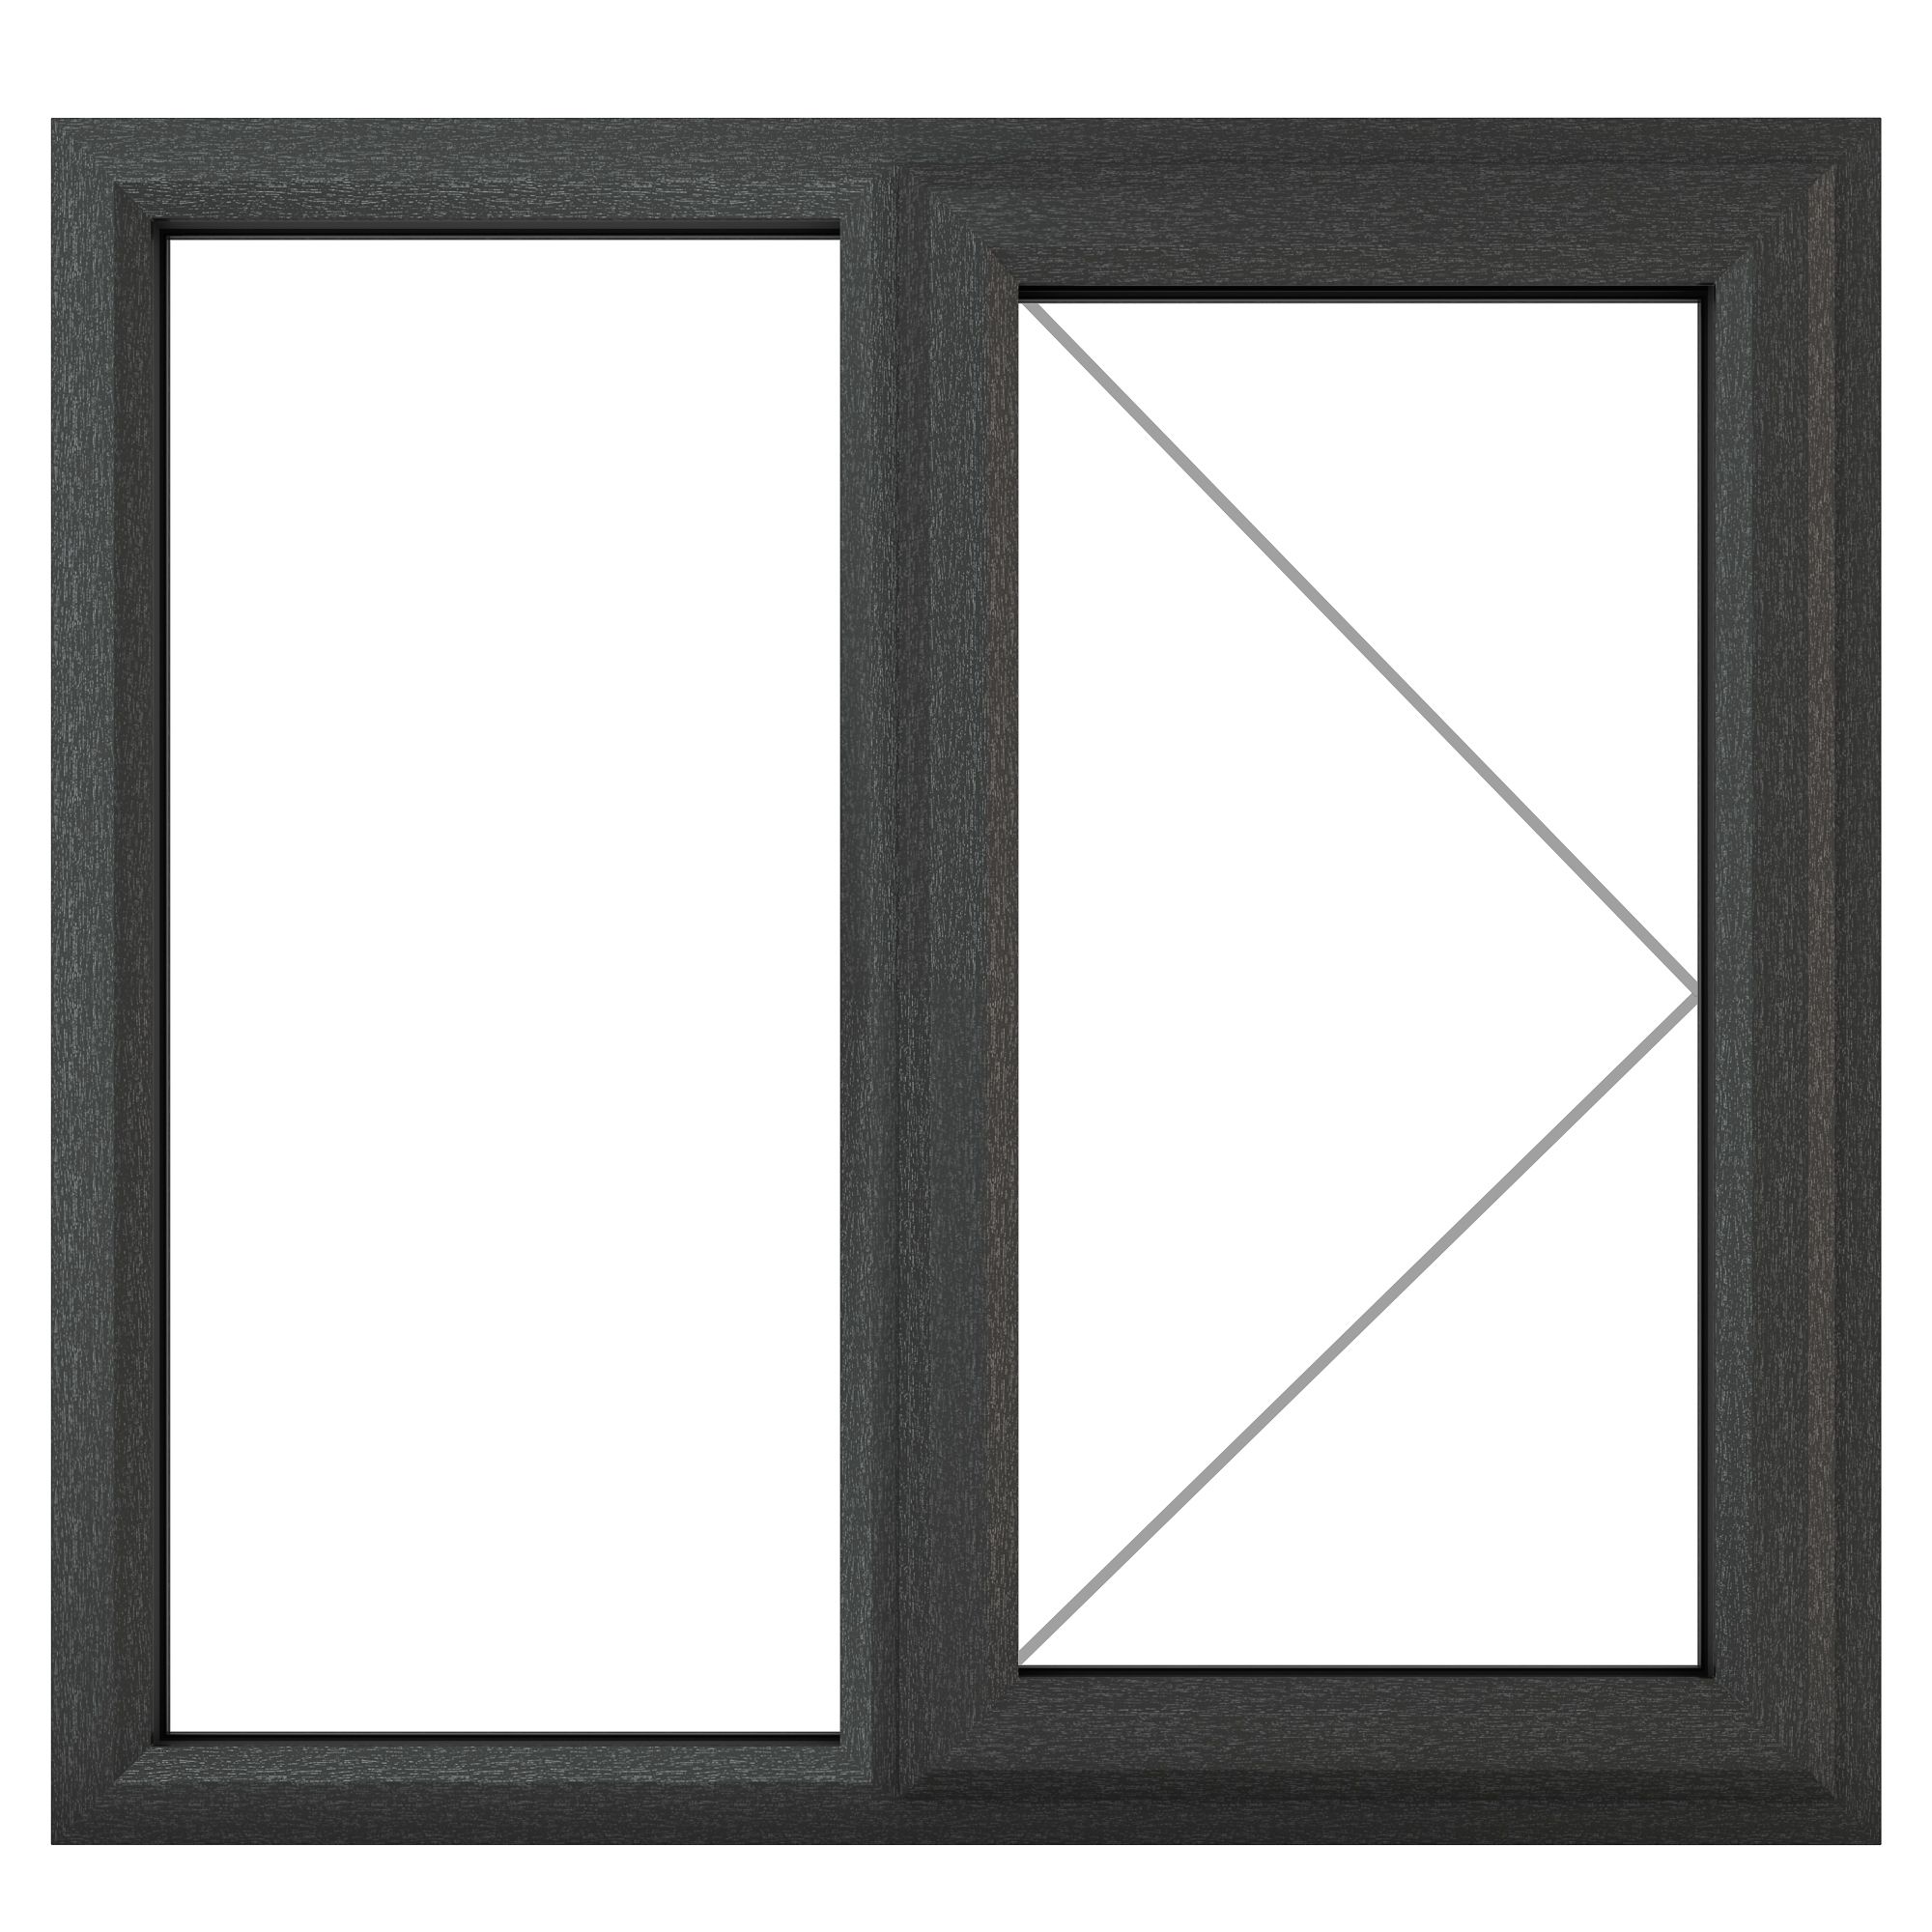 Fortia 2P Clear Glazed Anthracite uPVC Right-handed Swinging Window, (H)965mm (W)905mm